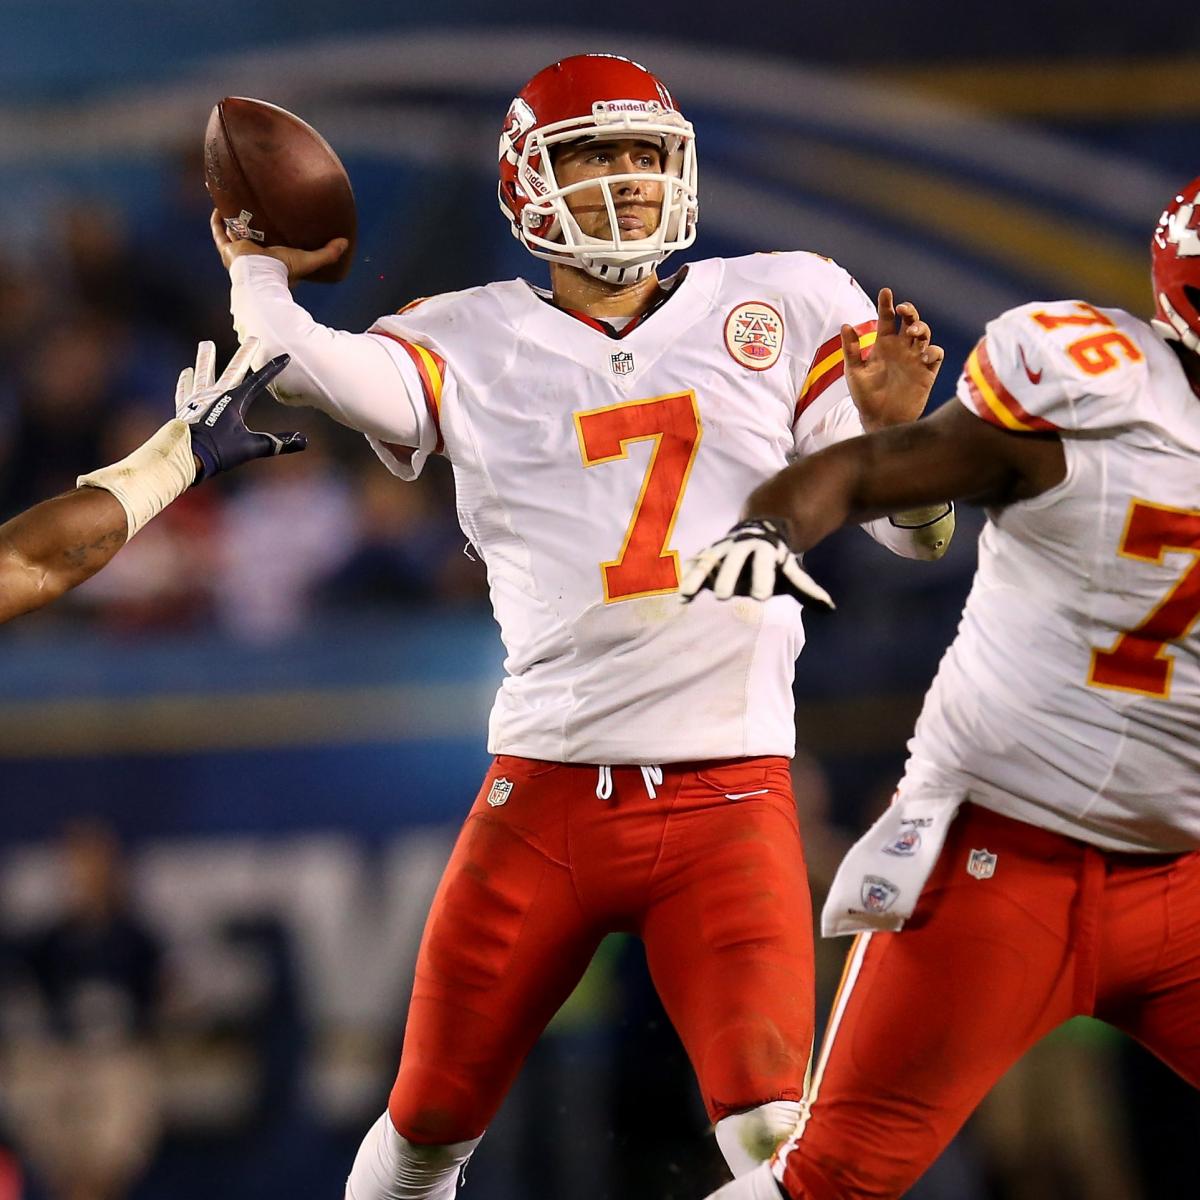 Chiefs Have Worst Quarterback Situation in NFL, Do Fans Trust Pioli to